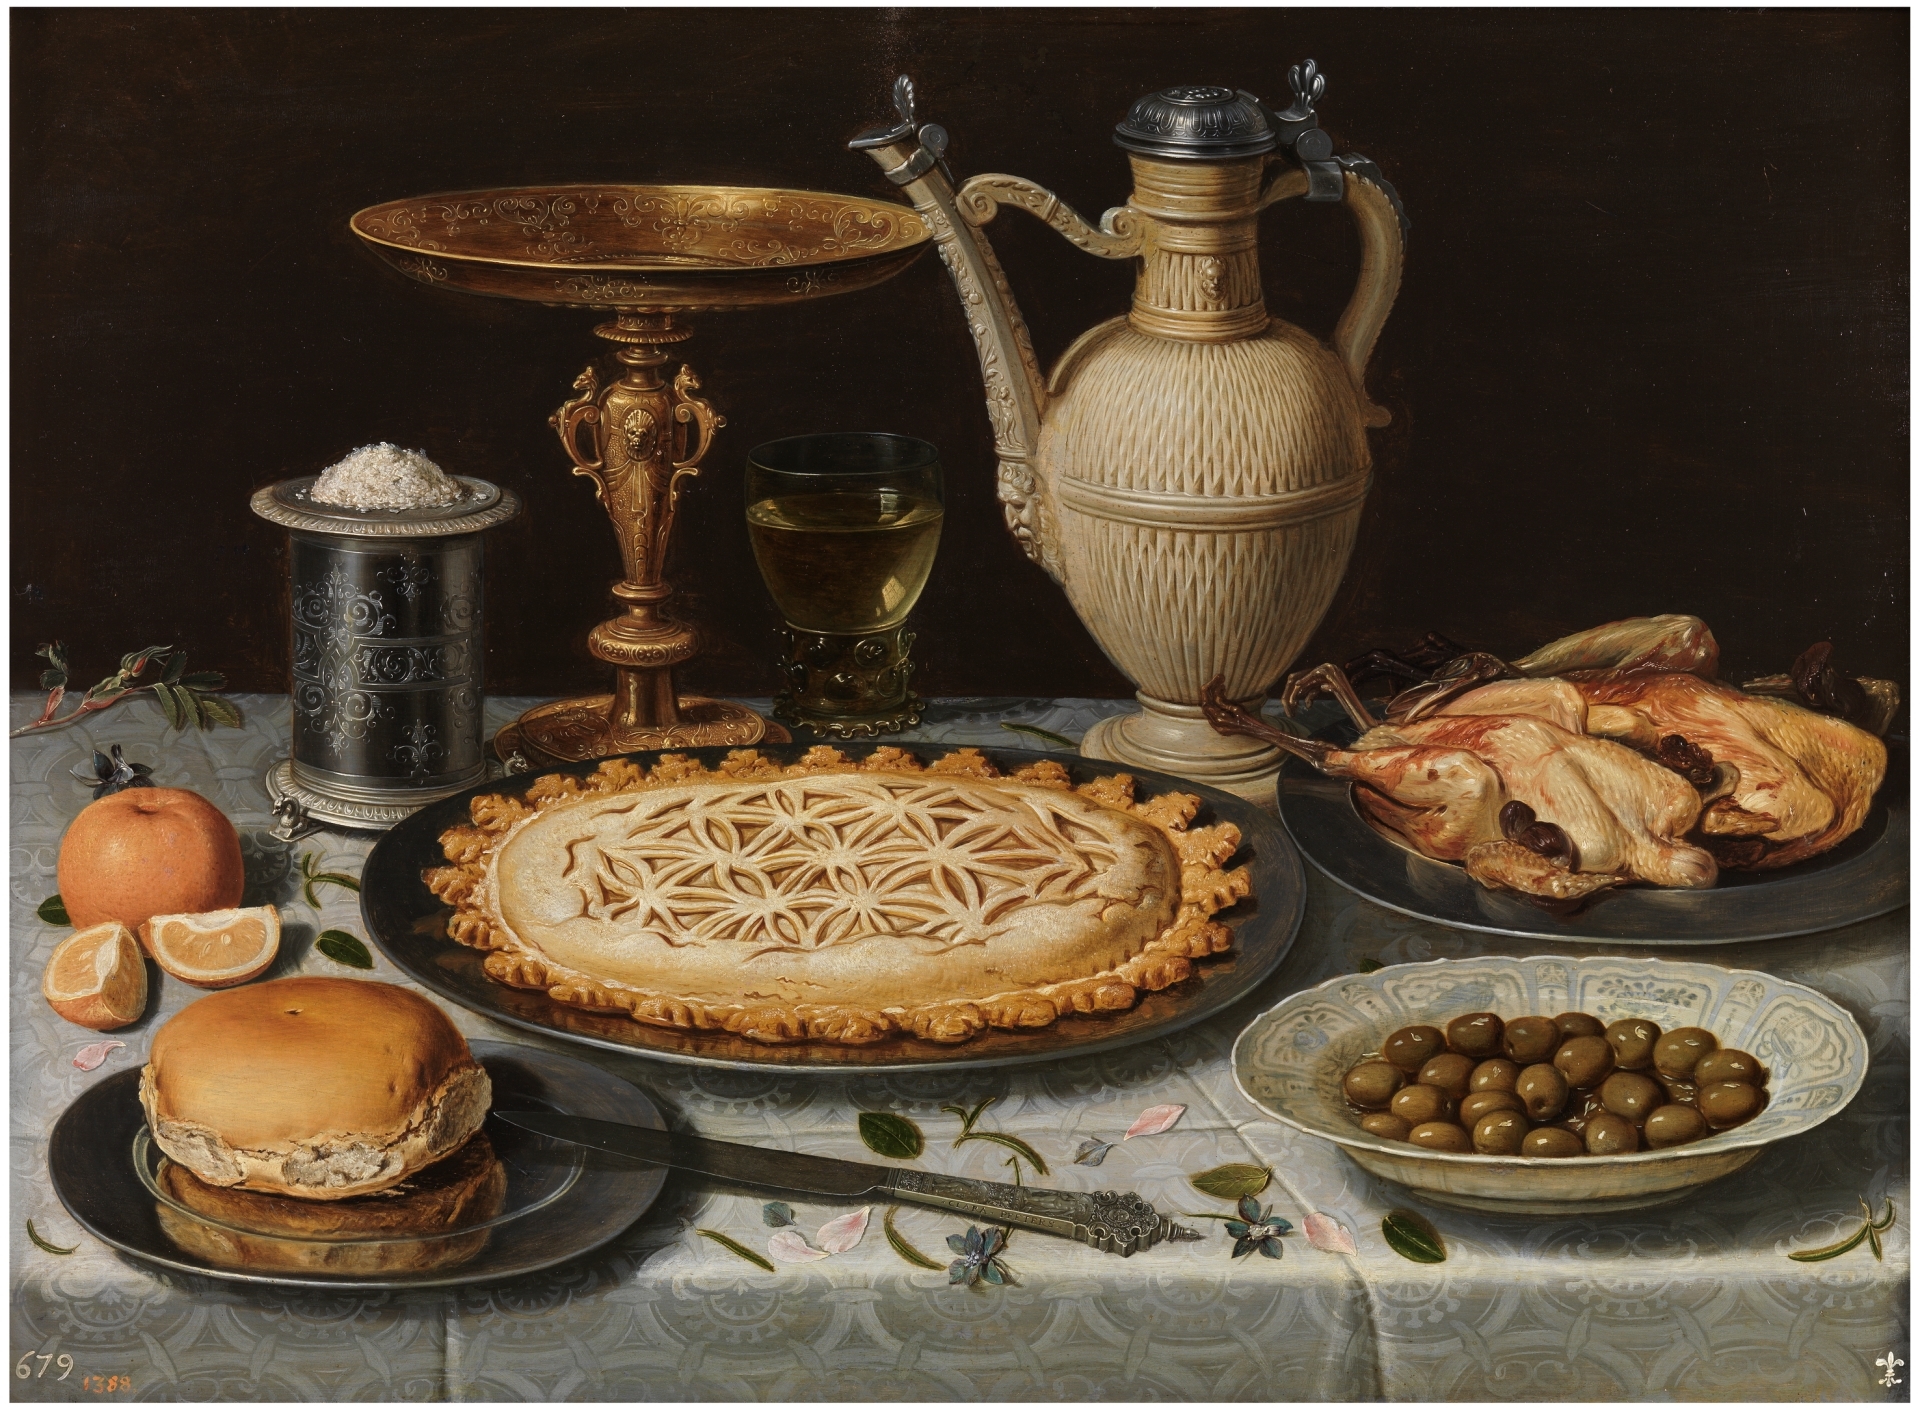 Table with a Cloth, Salt Cellar, Gilt Tazza, and more by Clara Peeters - c. 1611 - 55 x 73 cm Museo del Prado